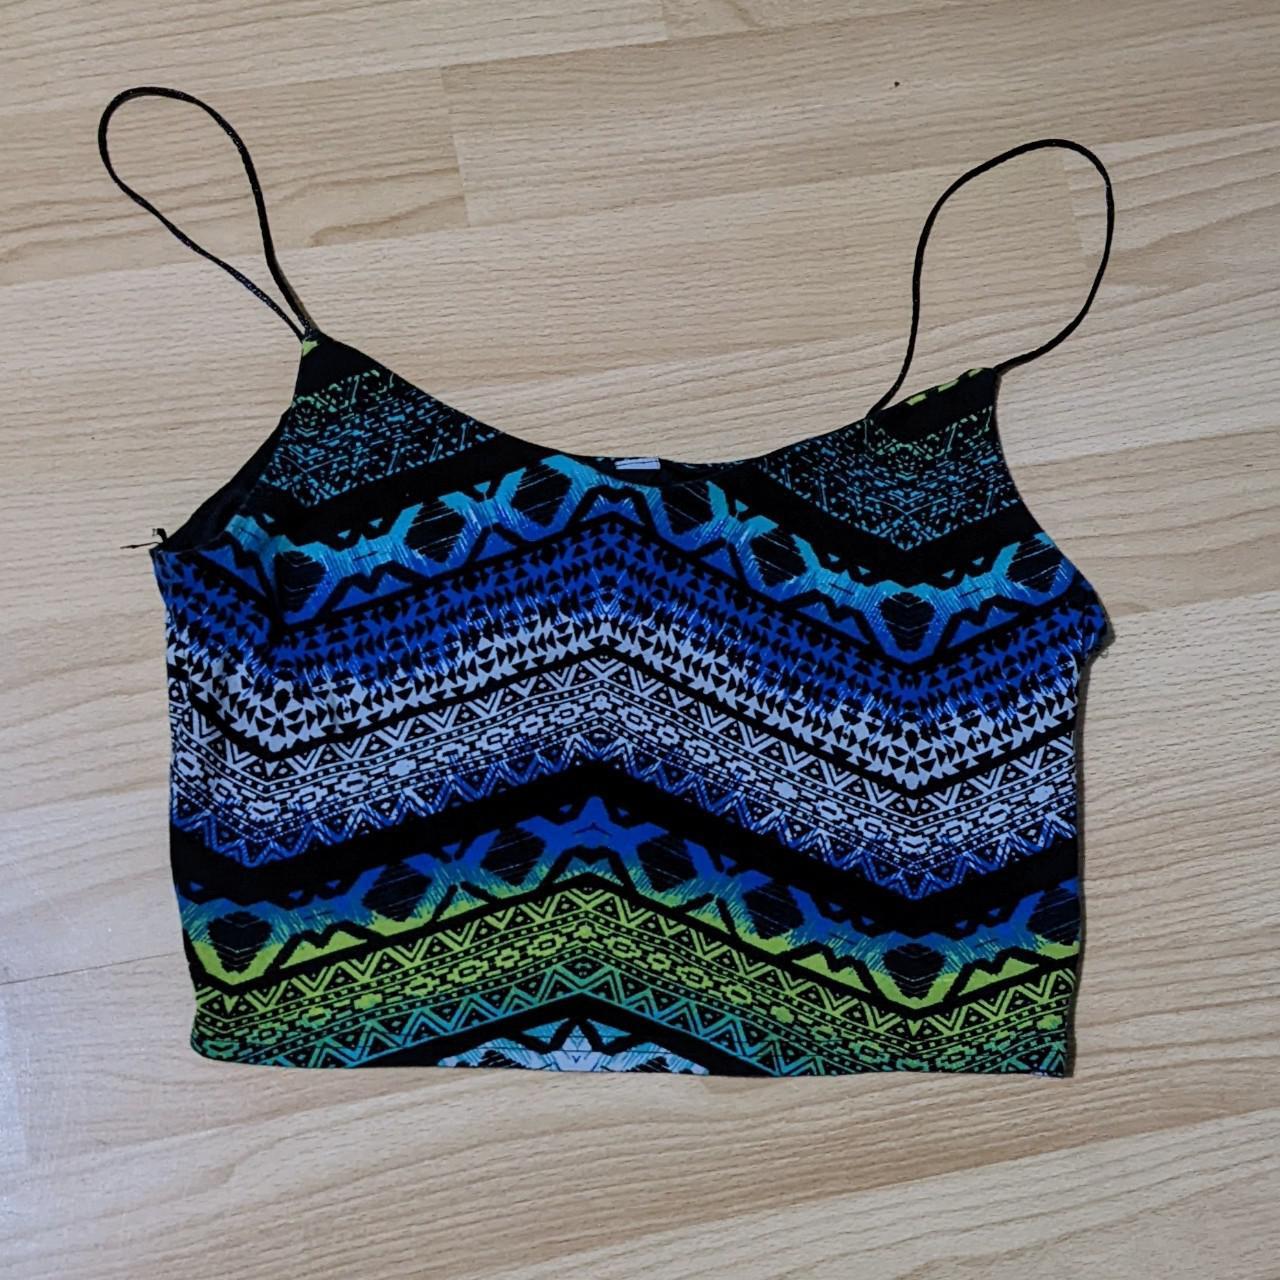 Colourful patterned New Look crop top. Perfect for... - Depop